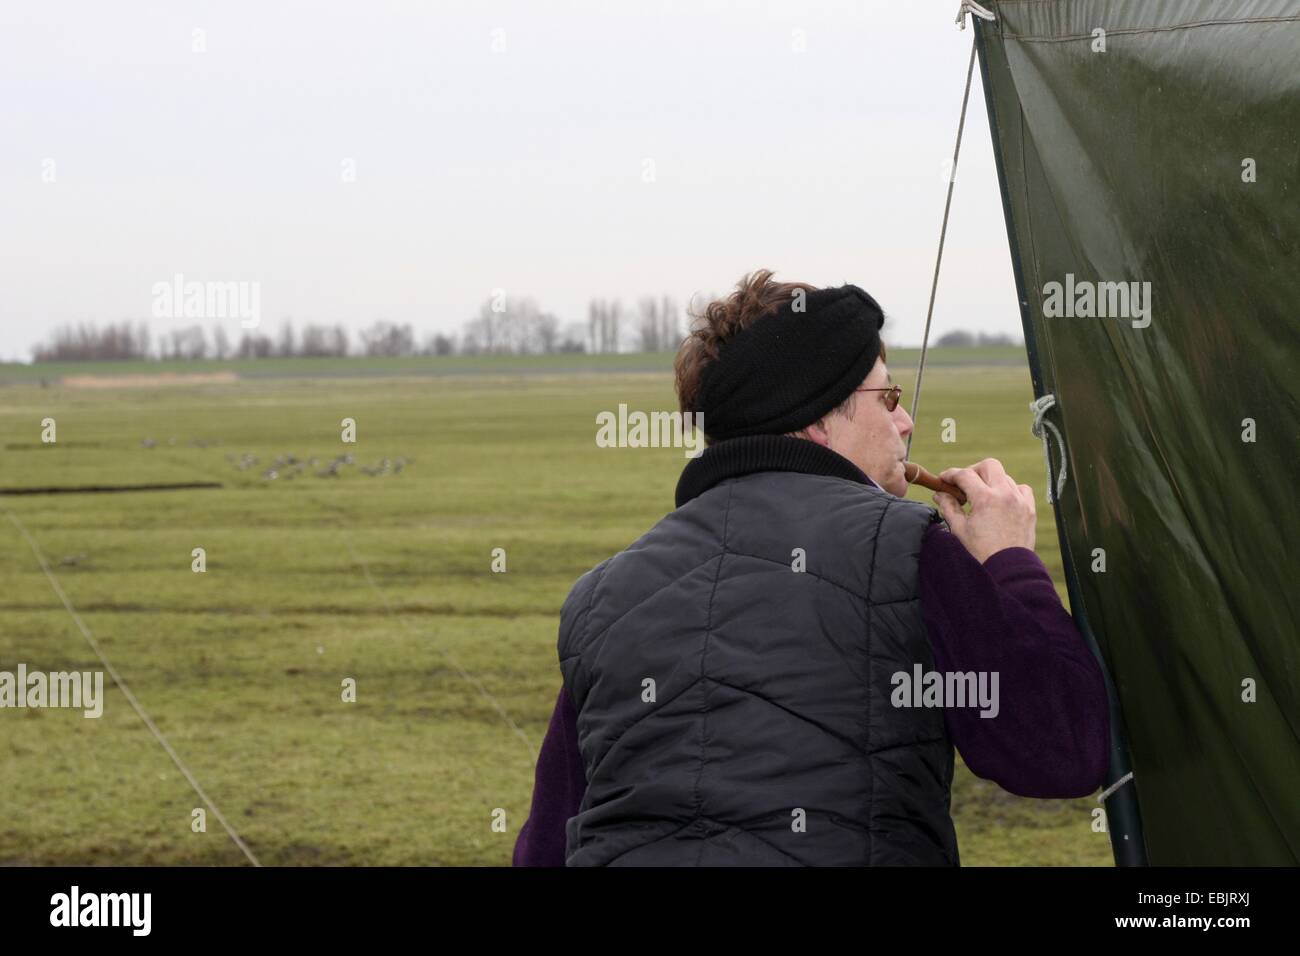 ornithologist with mating call for migrating wading birds, Netherlands, Frisia Stock Photo